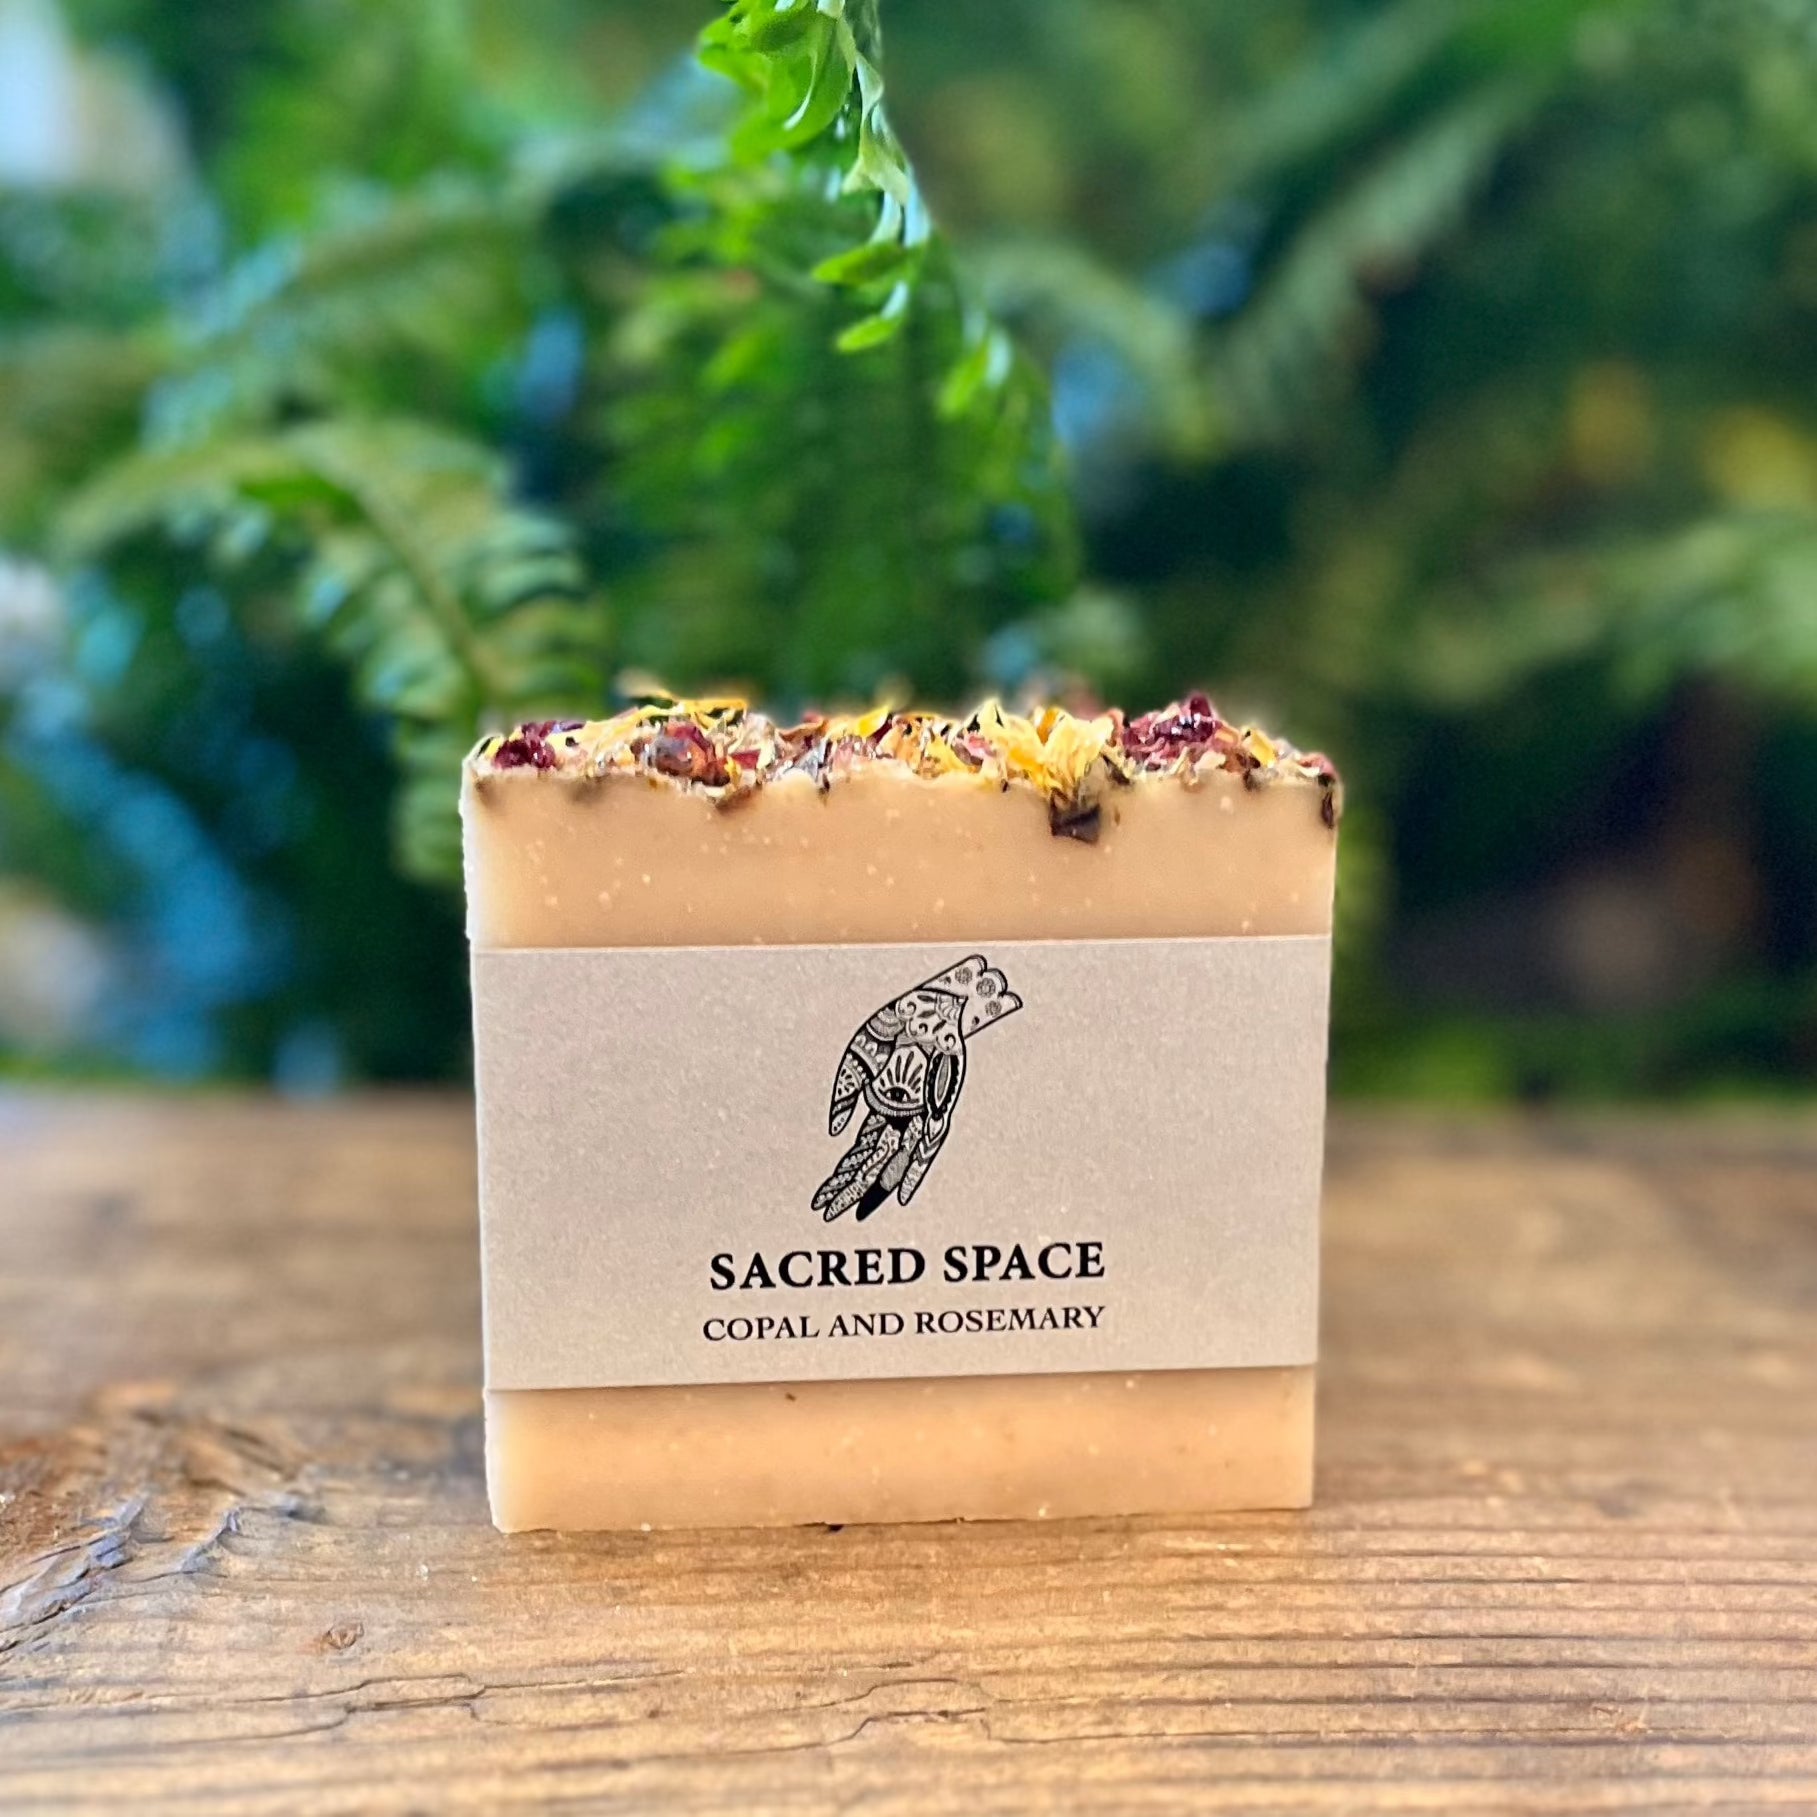 Handmade Cold Pressed Goat's Milk Soap with Local Colorado Goat's Milk - Sacred Space Soap with Organic Essential Oils of Copal and Rosemary for Serenity and Spiritual Connection, Topped with Organic Floral Botanicals